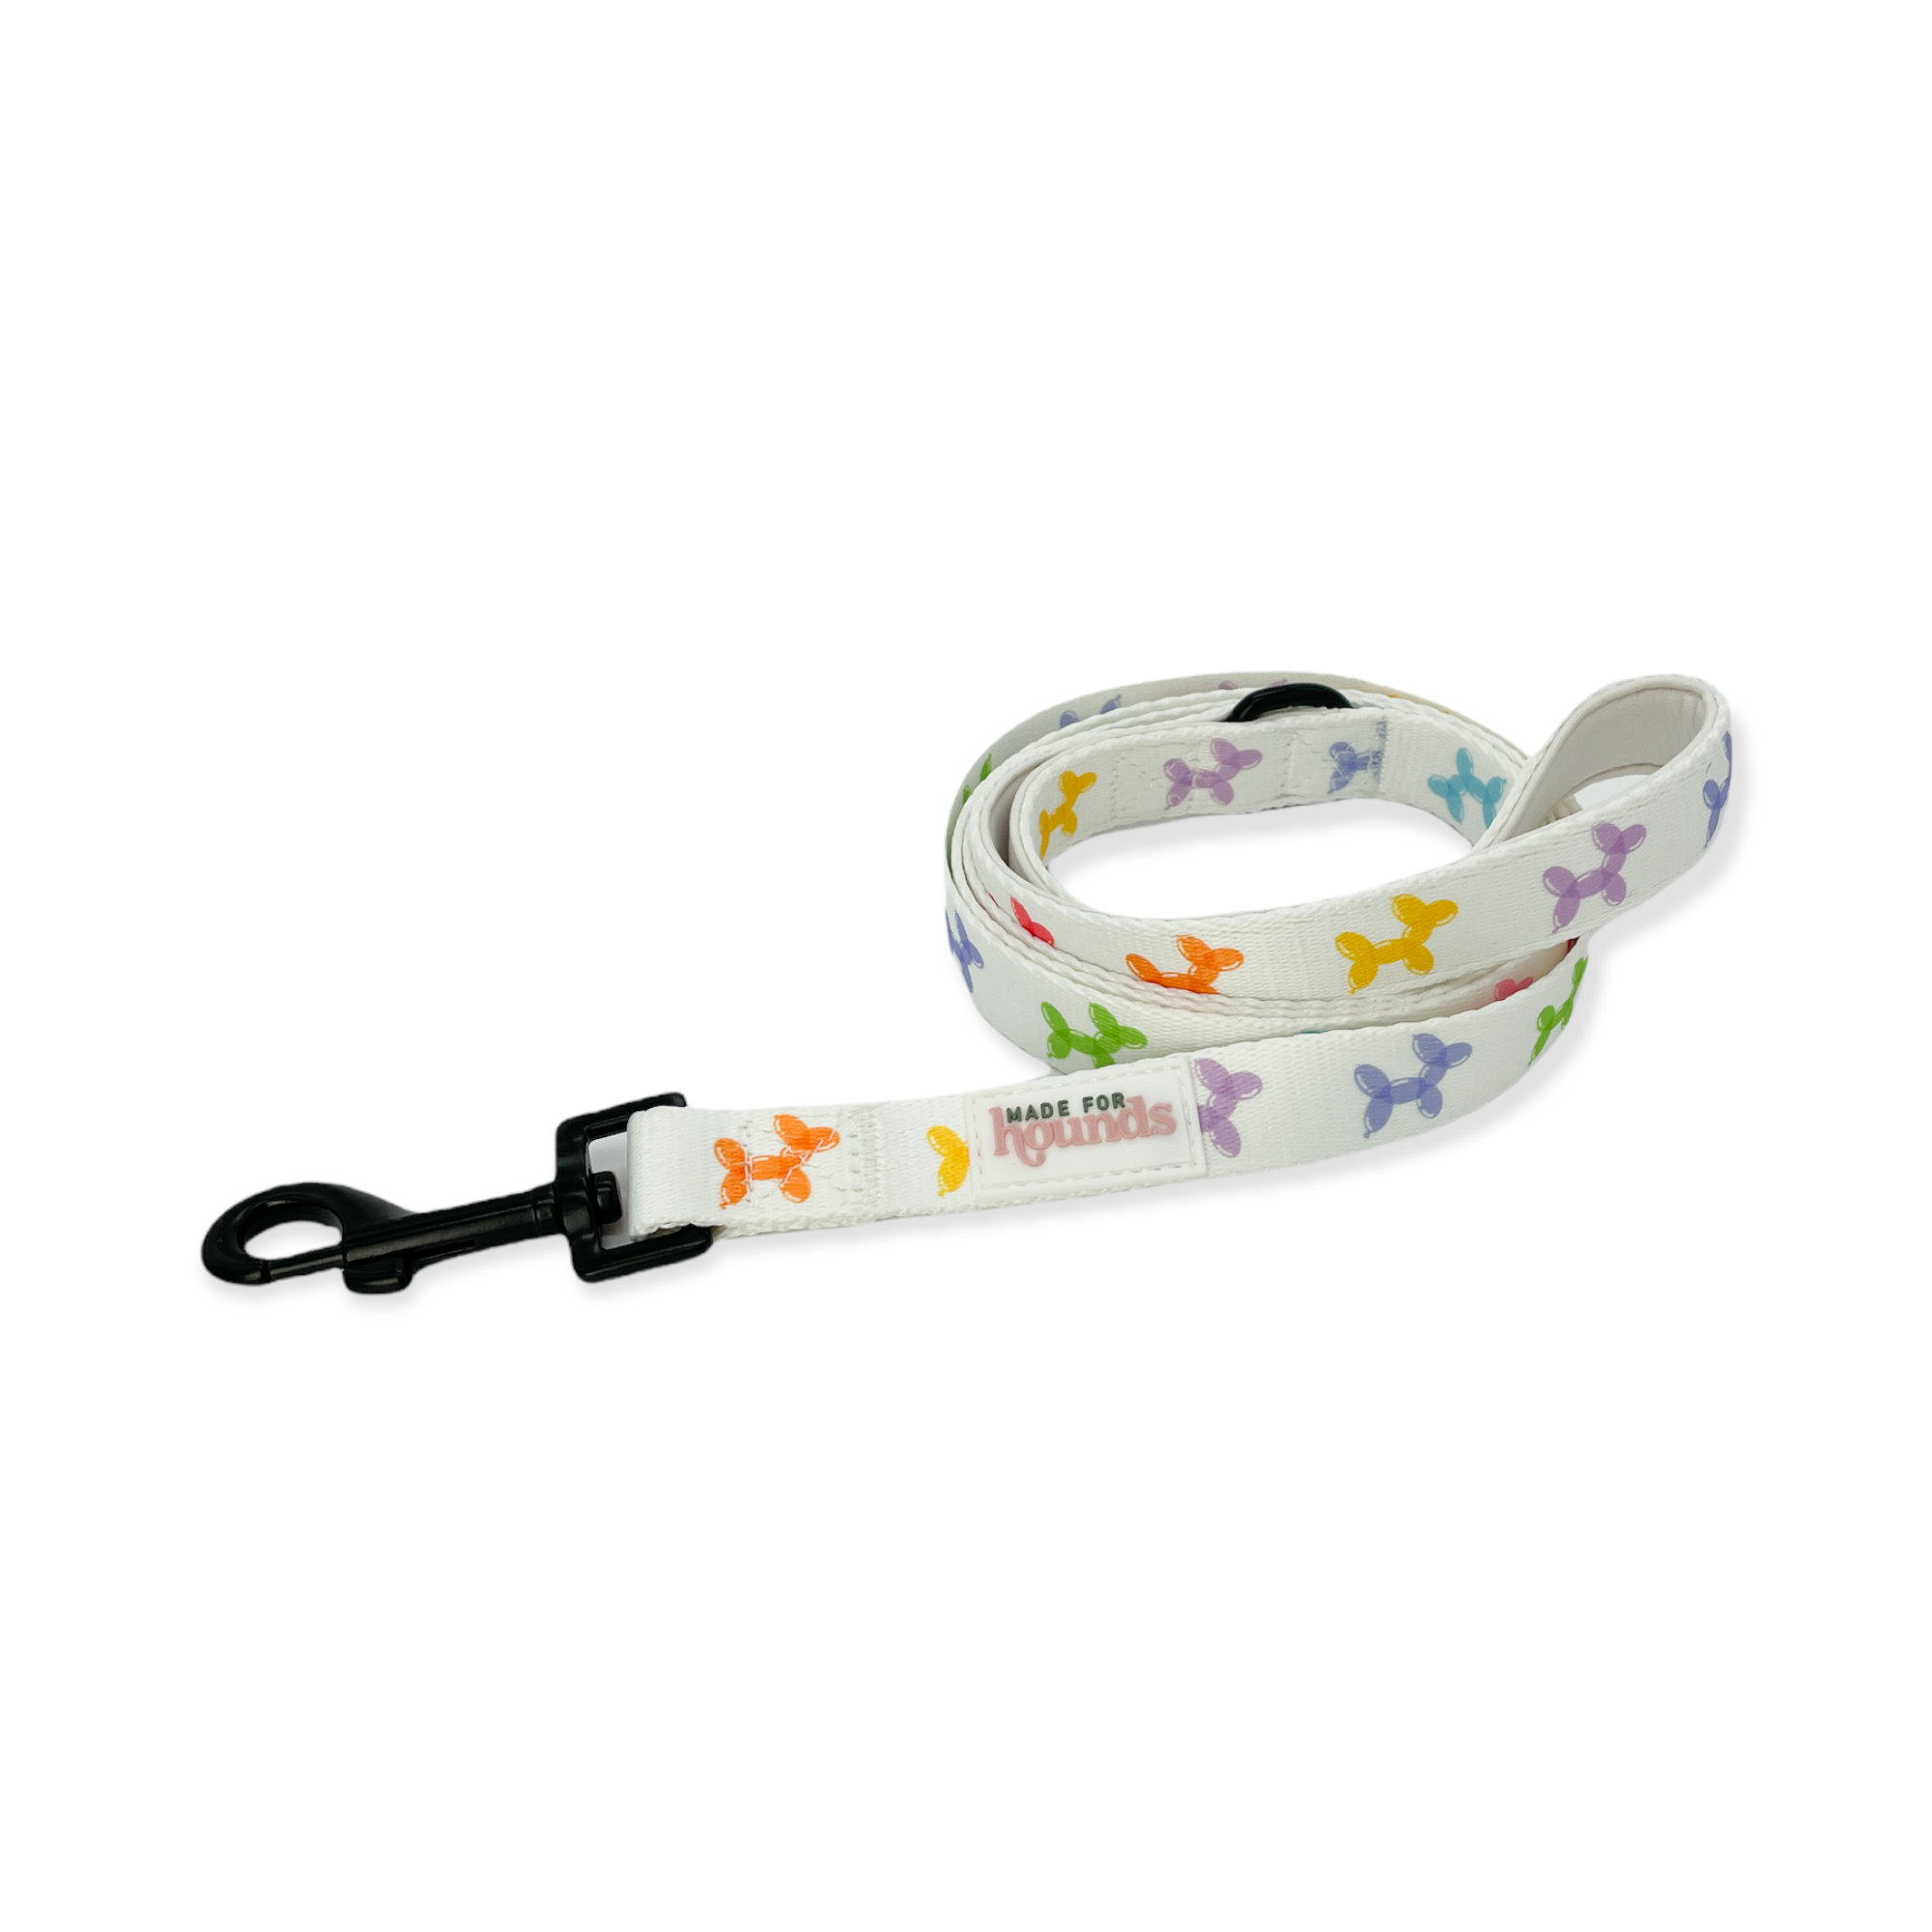 The Party Dog Leash